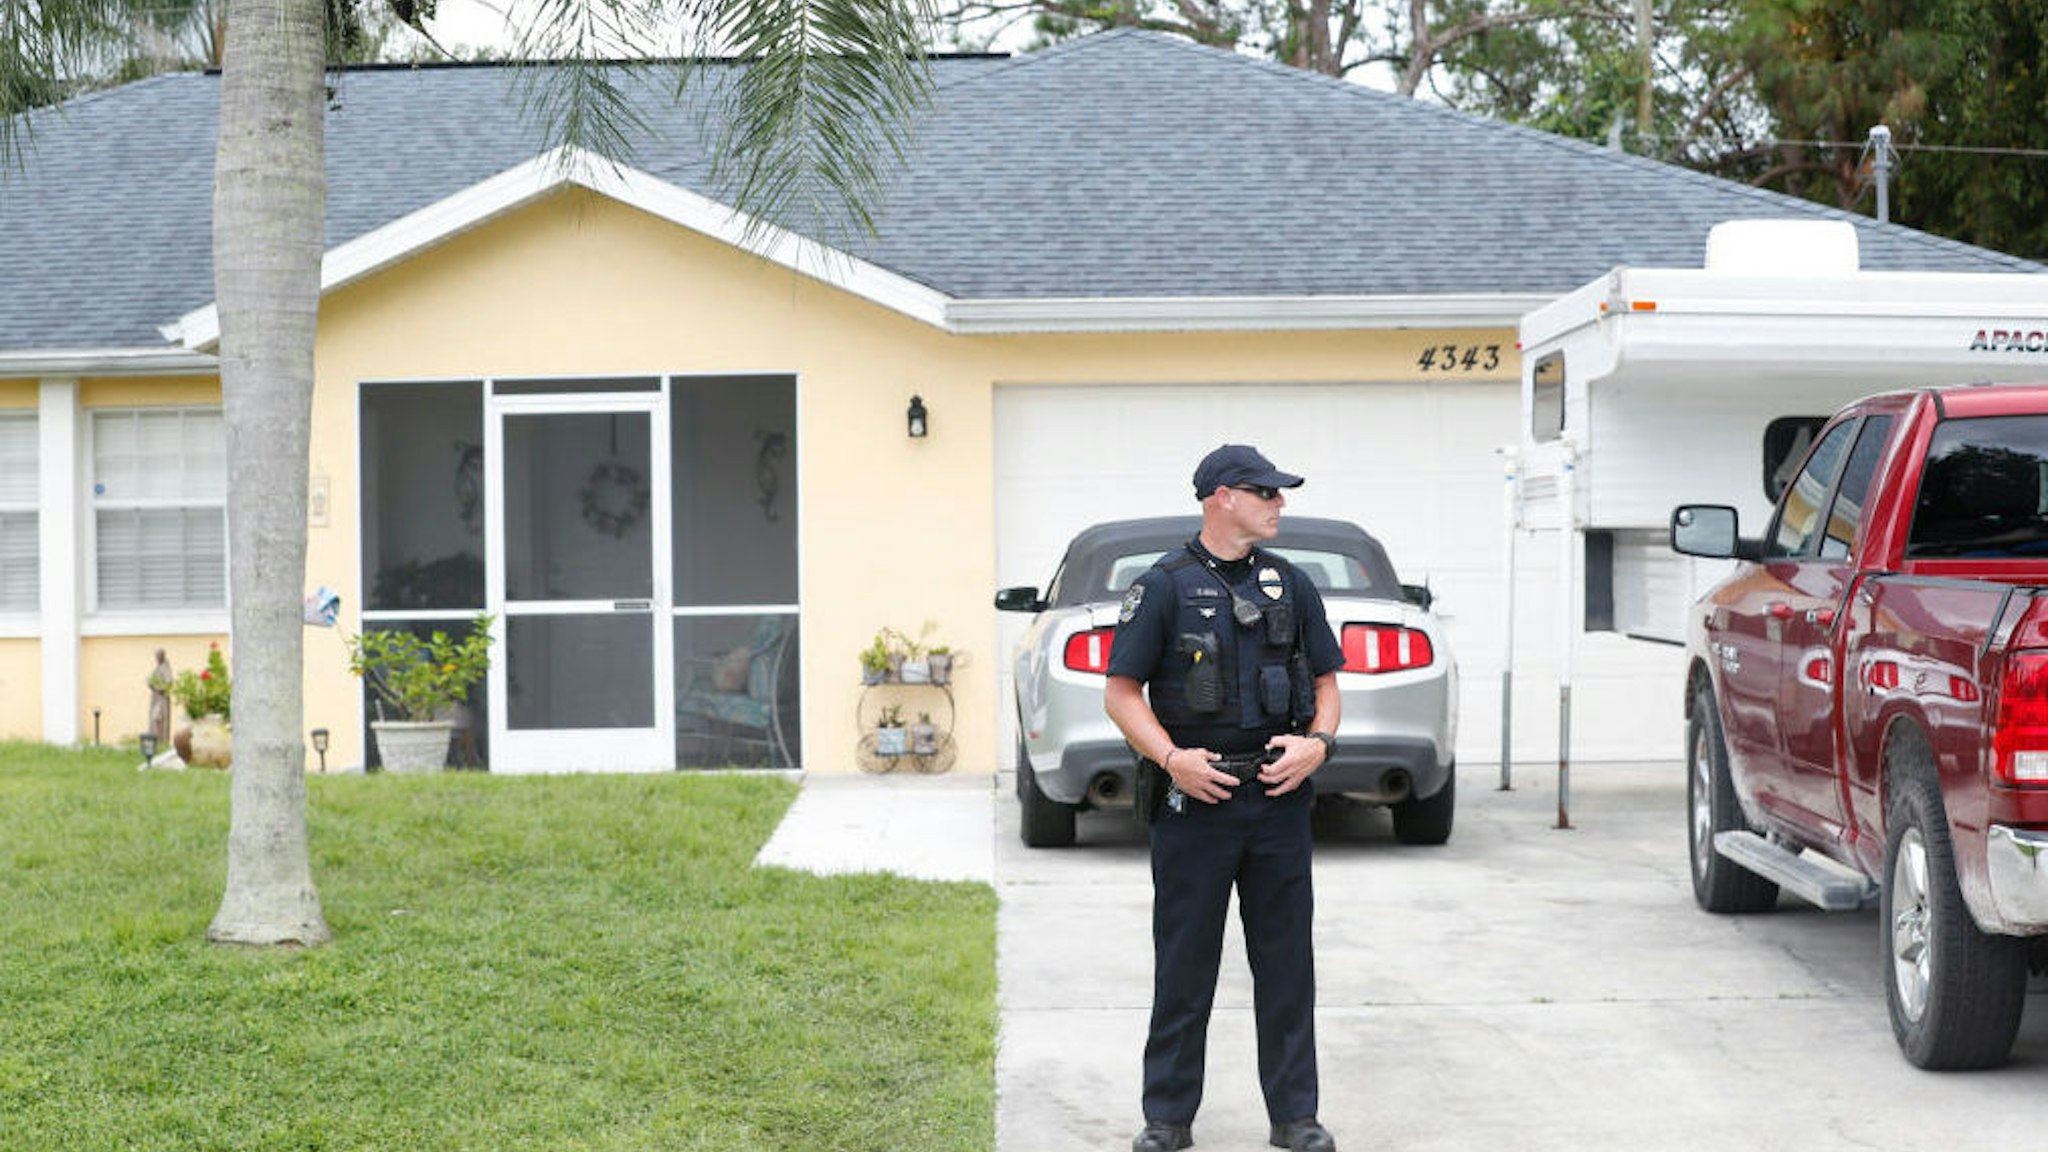 A North Port Police officer stands in the driveway of the family home of Brian Laundrie, who is a person of interest after his fiancé Gabby Petito went missing on September 20, 2021 in North Port, Florida.